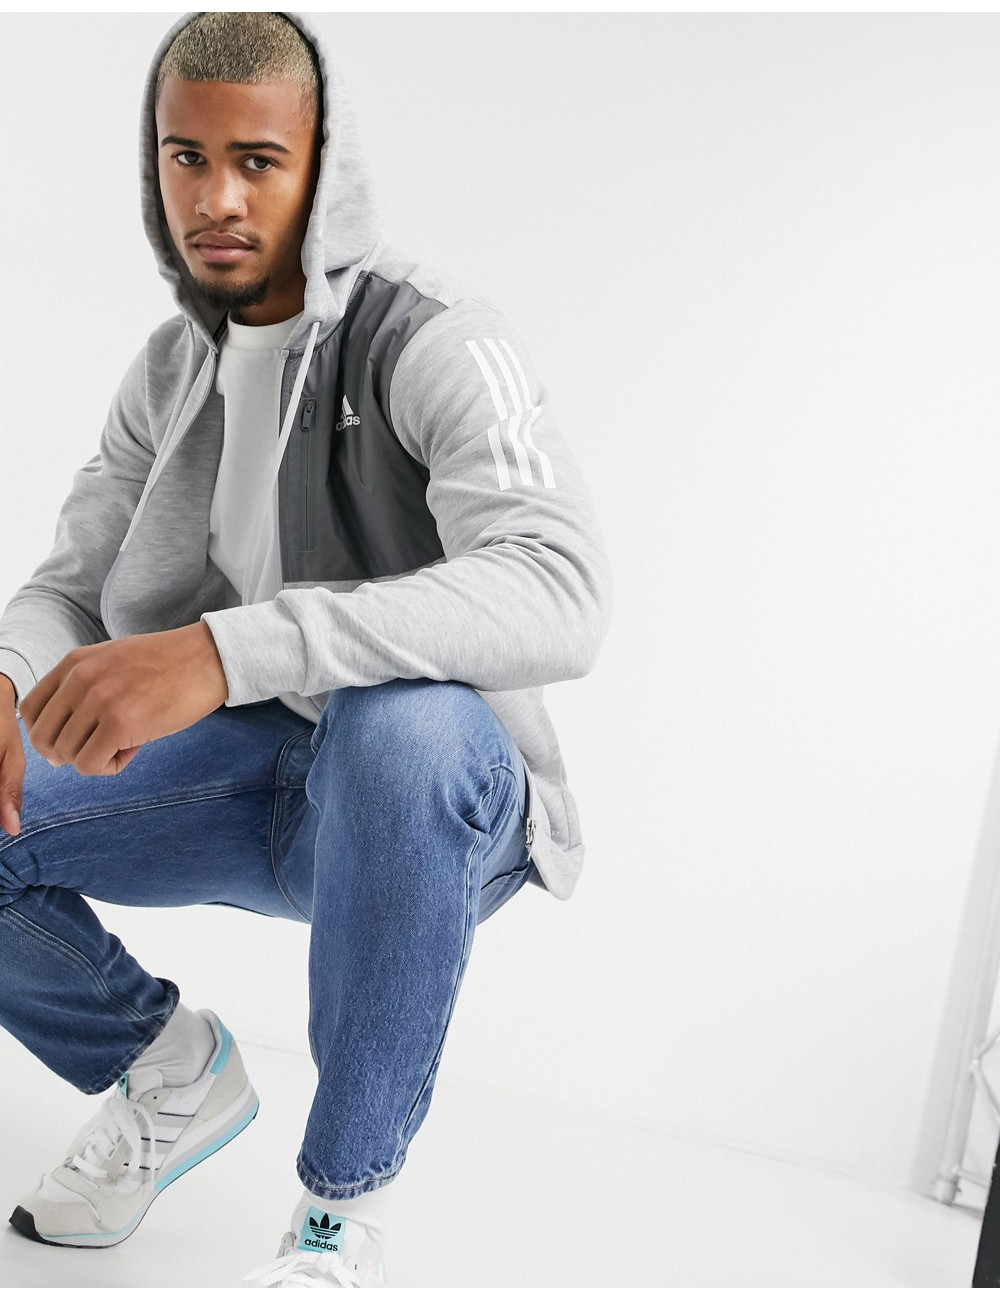 adidas hoodie in grey with...